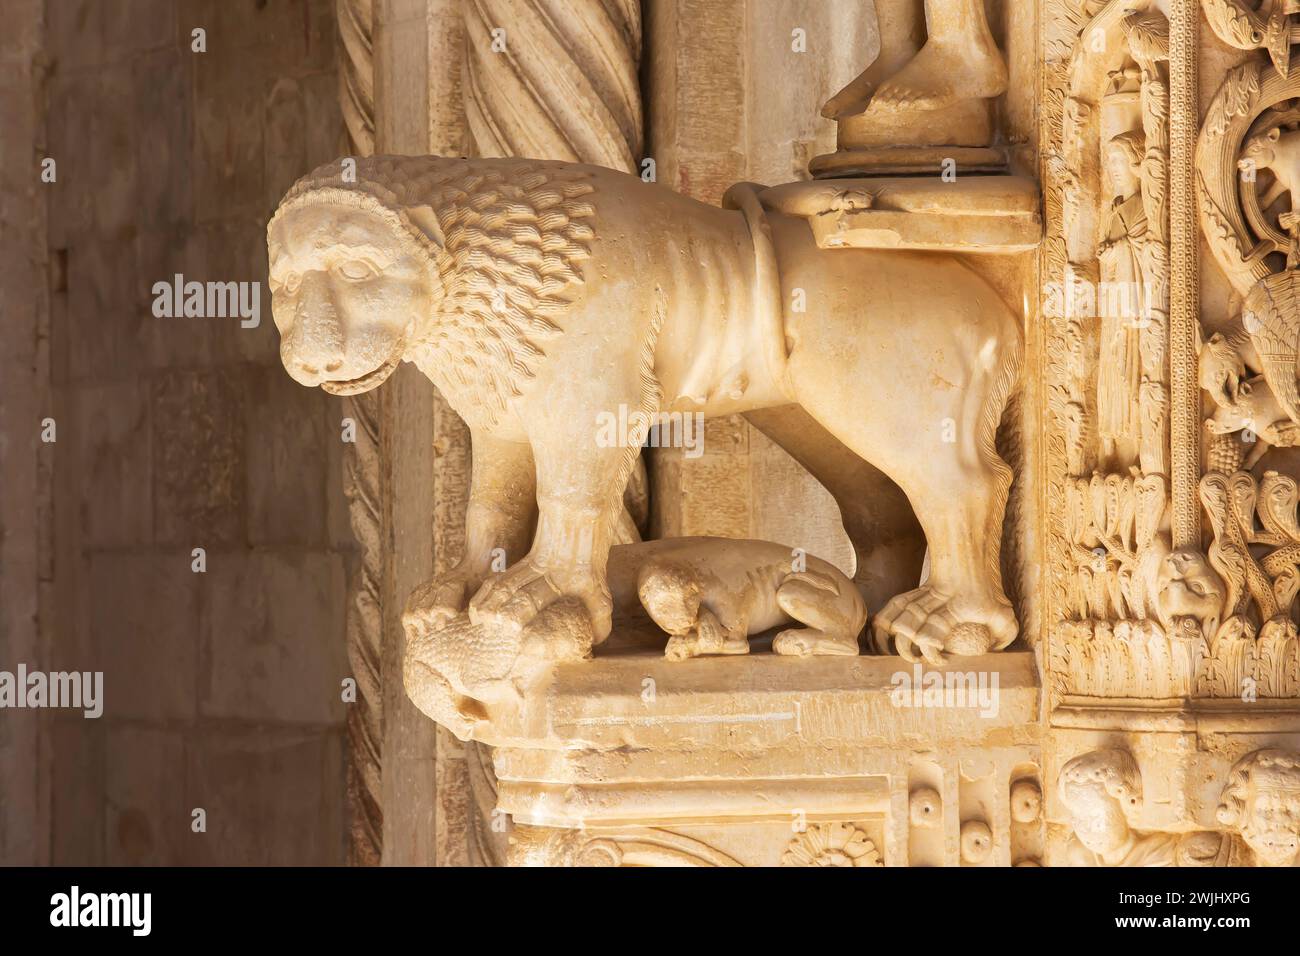 Intricate hand carved sculptures at the main entrance of the Roman Catholic Cathedral of St. Lawrence (13th century) in Trogir, Croatia Stock Photo